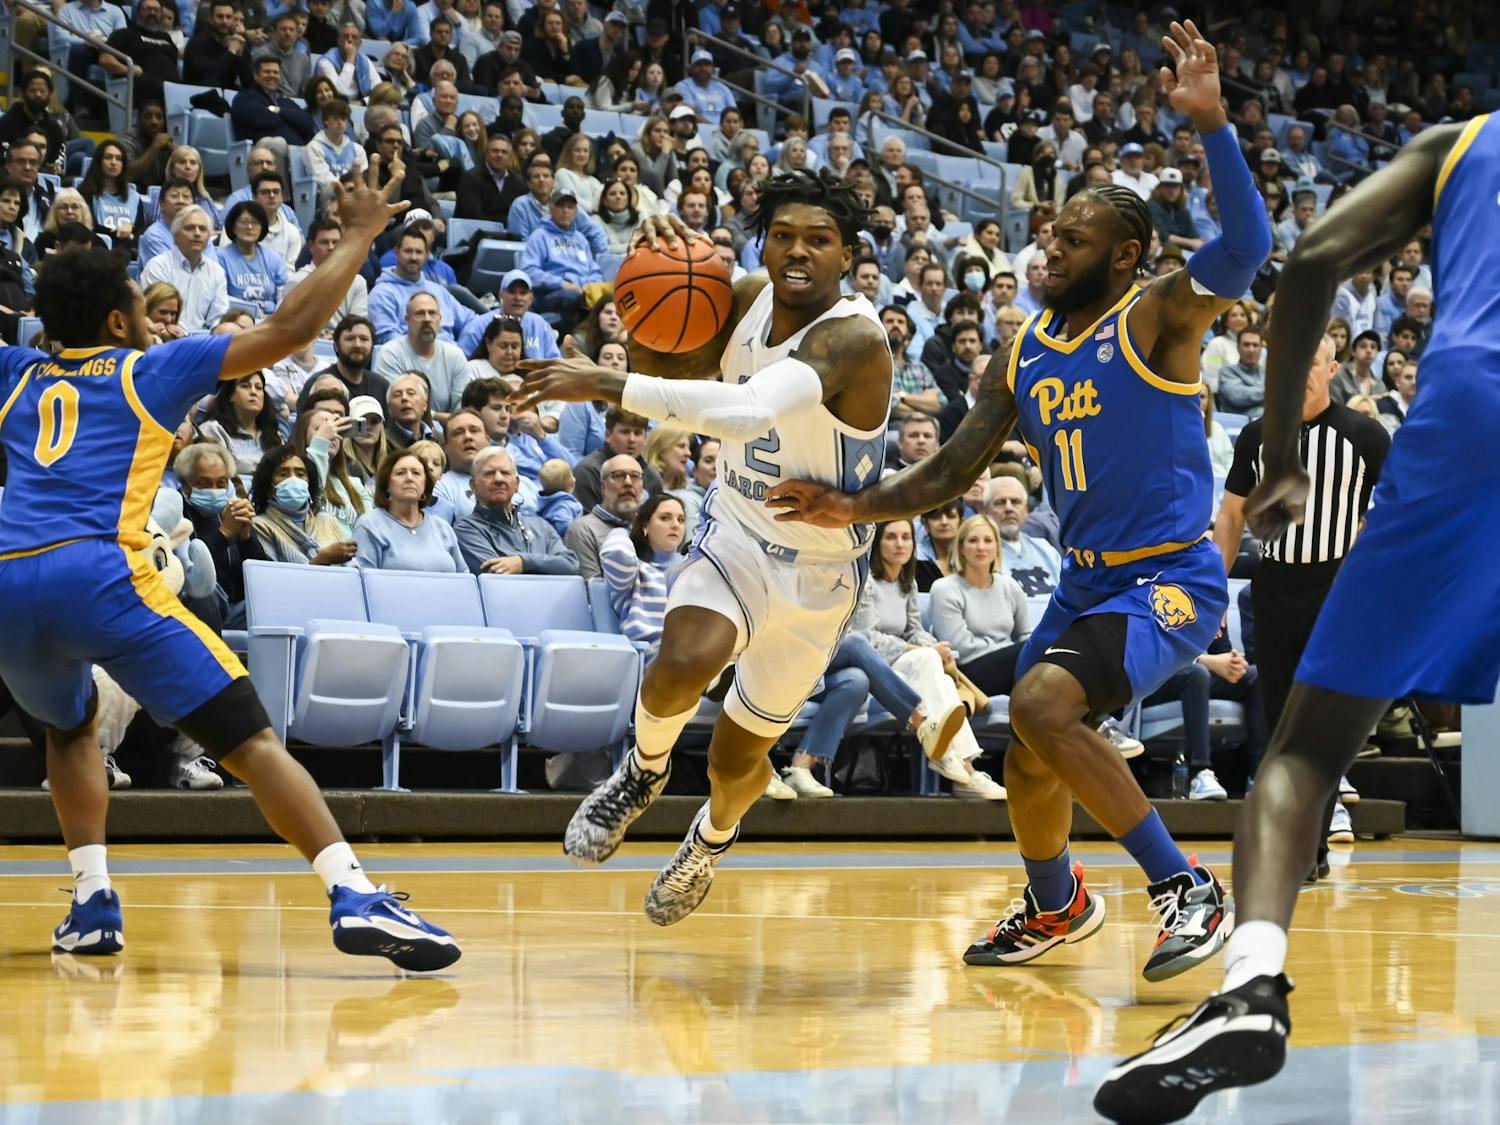 UNC junior guard Caleb Love (2) drives toward the basket during the men's basketball game against Pitt in the Dean Smith Center on Wednesday, Feb. 1, 2023. 